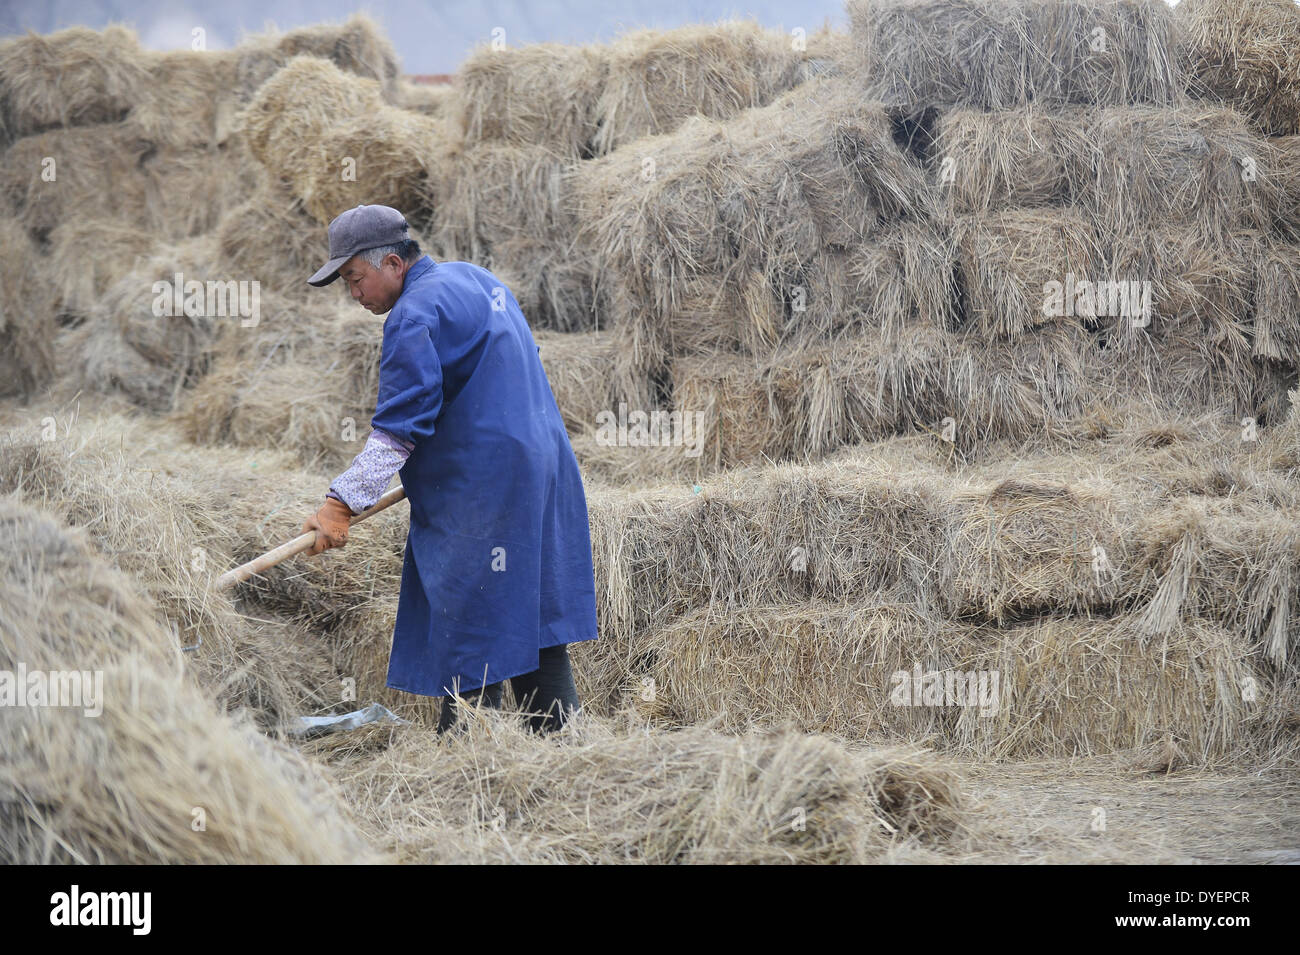 Xining. 15th Apr, 2014. A worker clears fodder grass at a breeding cooperative in Guide County of Hainan Tibetan Autonomous Prefecture in northwest China's Qinghai Province, April 15, 2014. Guide strived to develop its modern agricultural economy along the Yellow River, and it has become a key food source in Qinghai. © Wu Gang/Xinhua/Alamy Live News Stock Photo